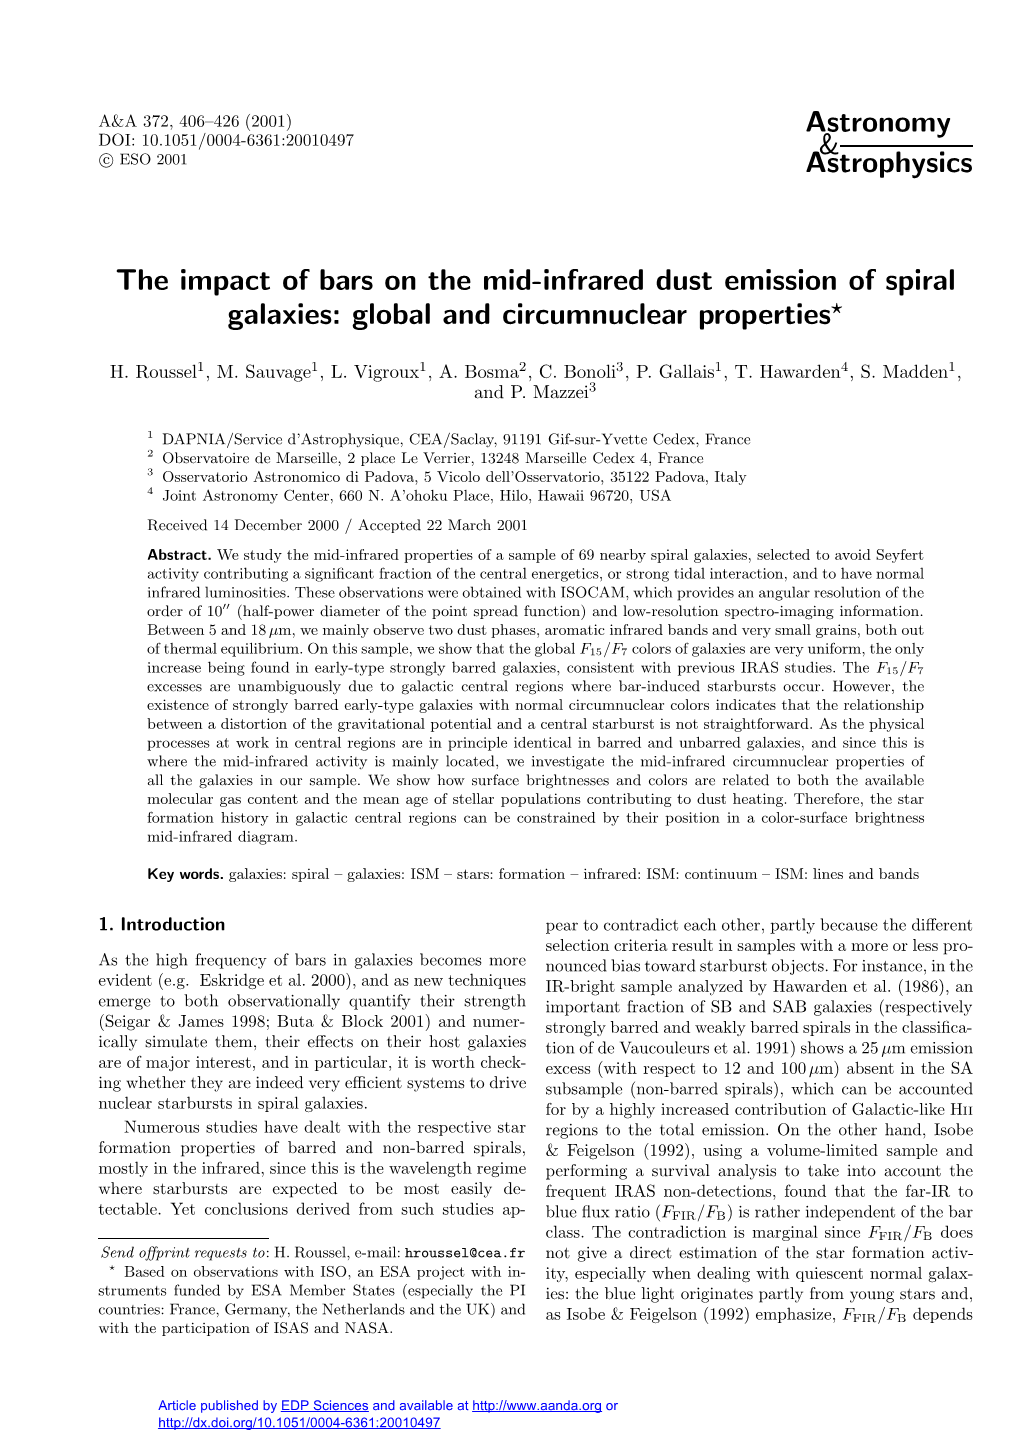 The Impact of Bars on the Mid-Infrared Dust Emission of Spiral Galaxies: Global and Circumnuclear Properties?